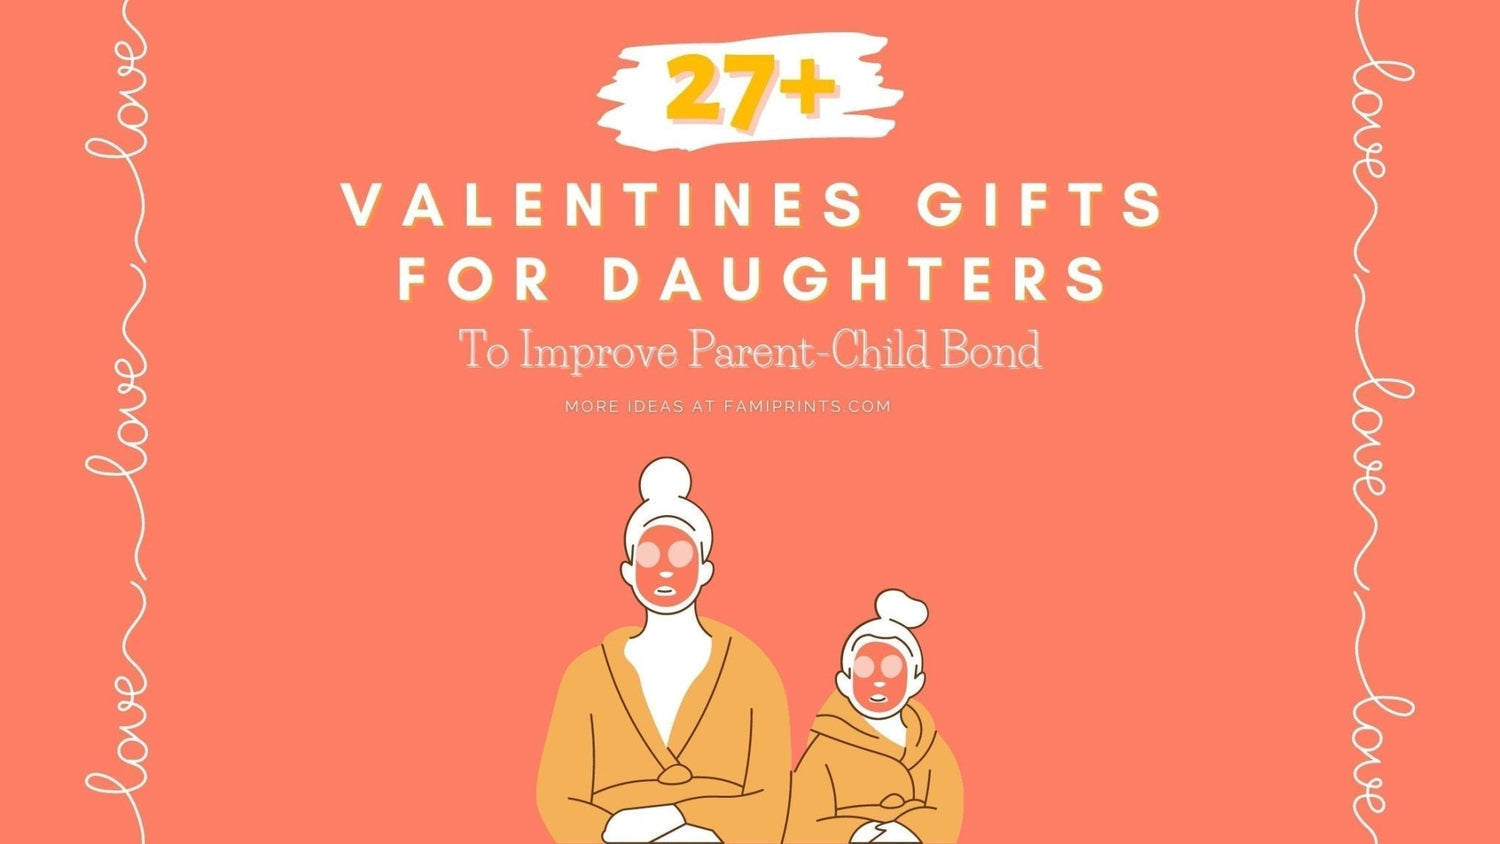 27+ Valentines Gifts For Daughters To Improve Parent-Child Bond | FamiPrints | Trending Customizable Family Gifts